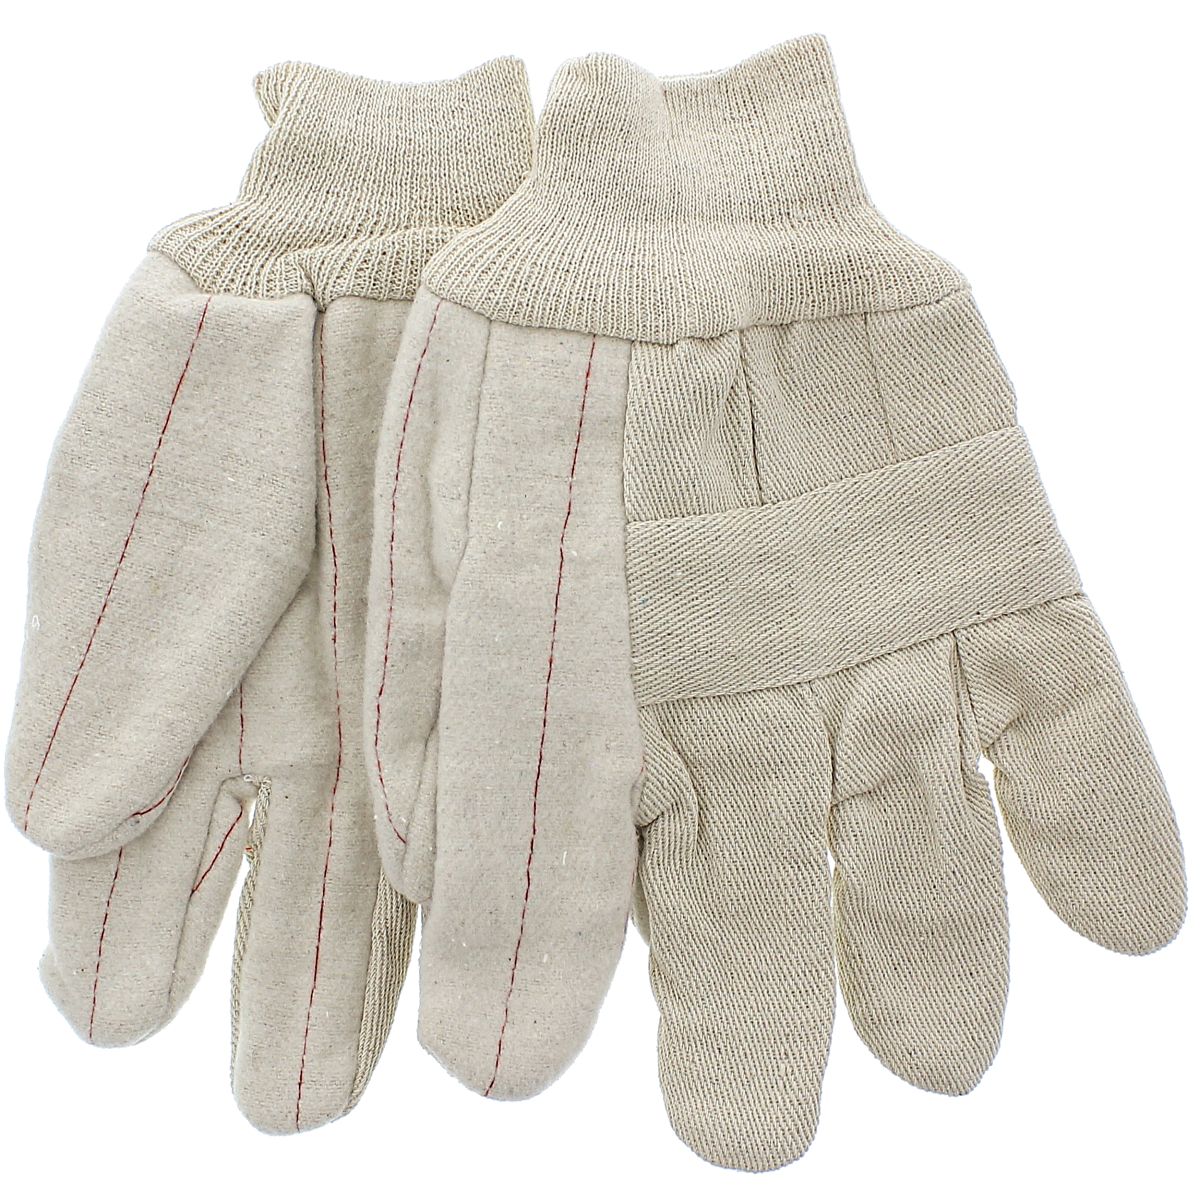 Tacoma Screw Products  Cotton Work Gloves, Large — 24 oz.